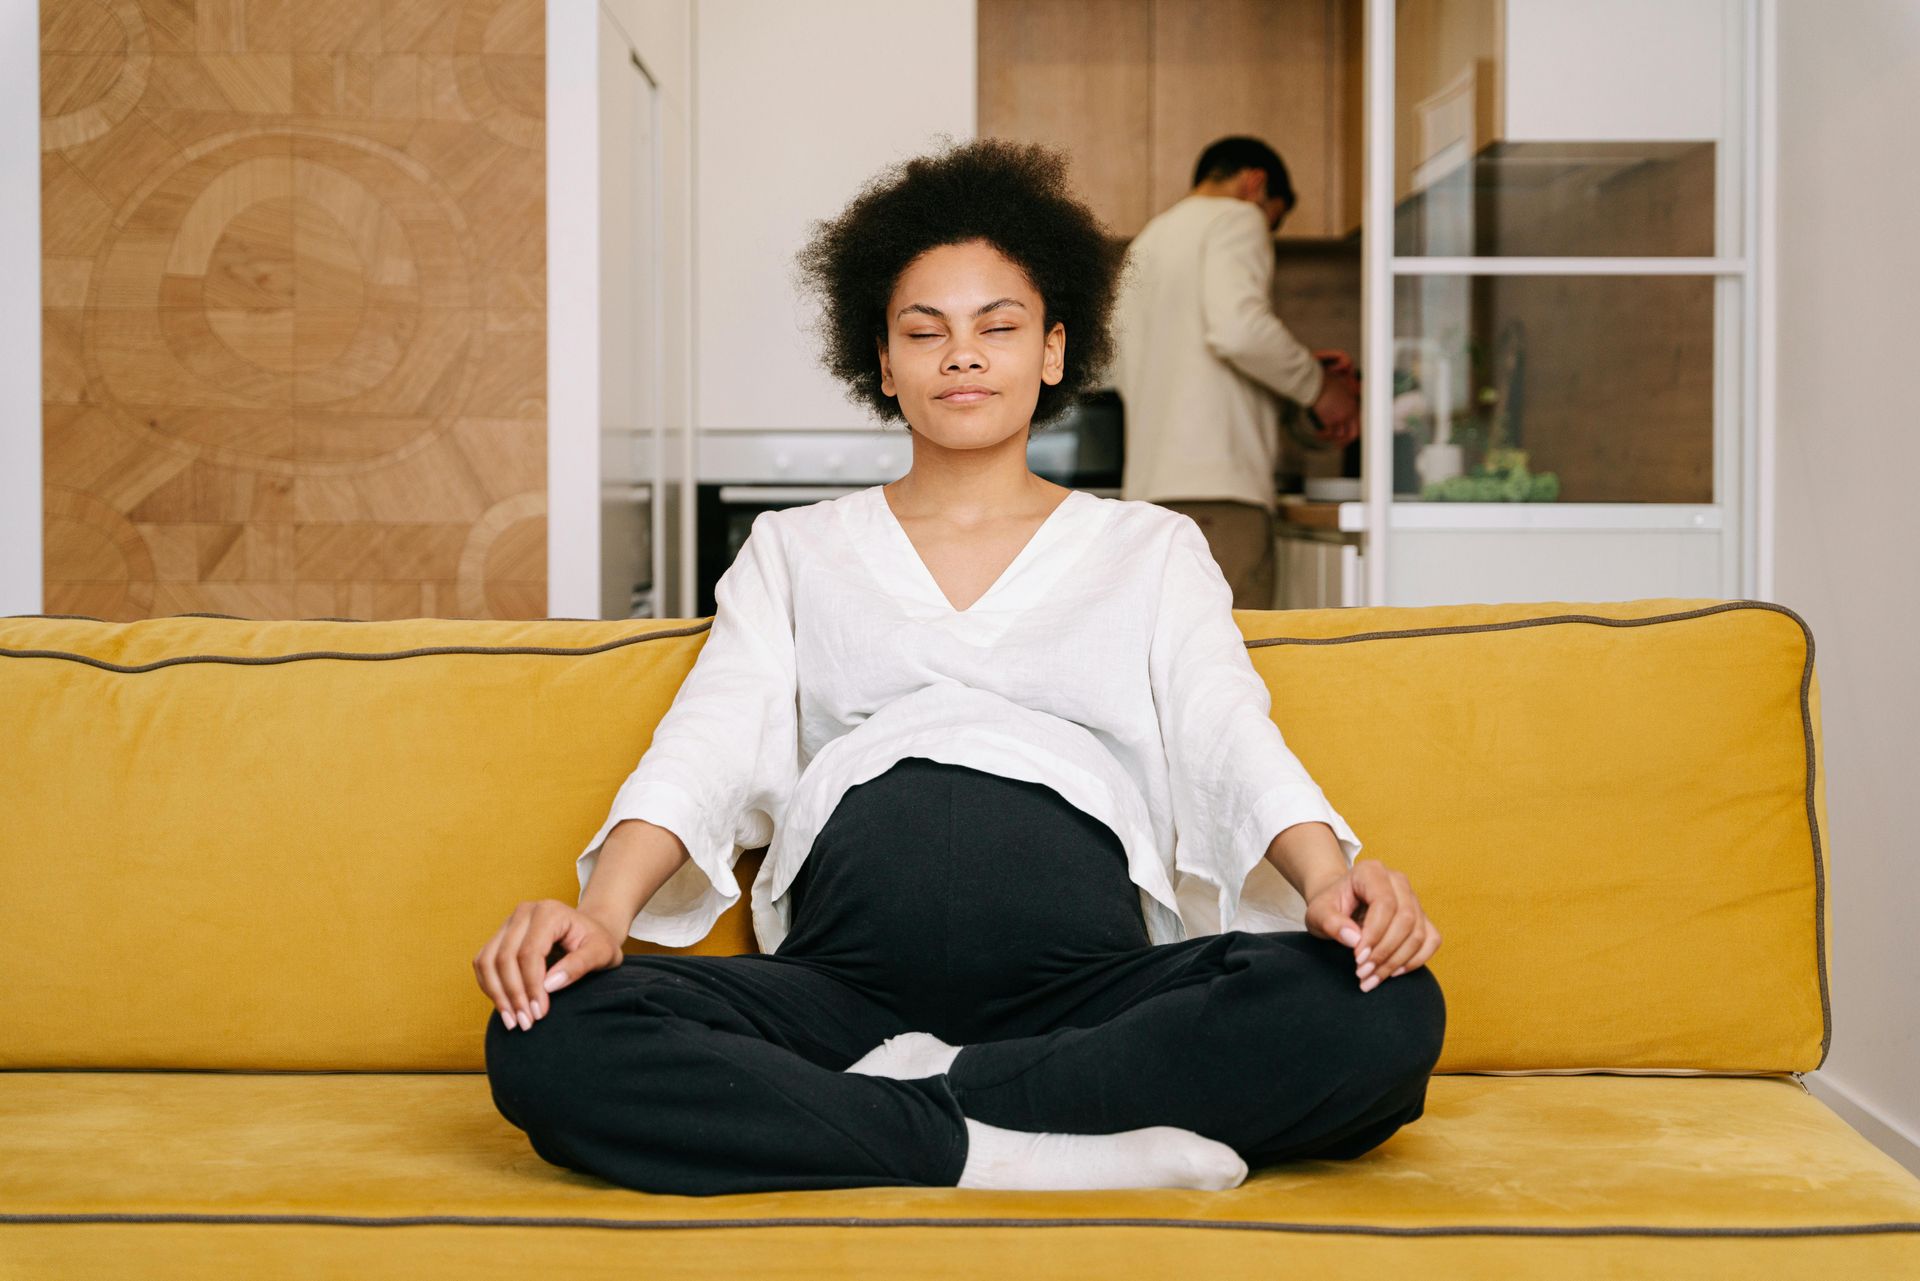 Woman meditating calmly on a yellow couch, eyes closed in a serene living room